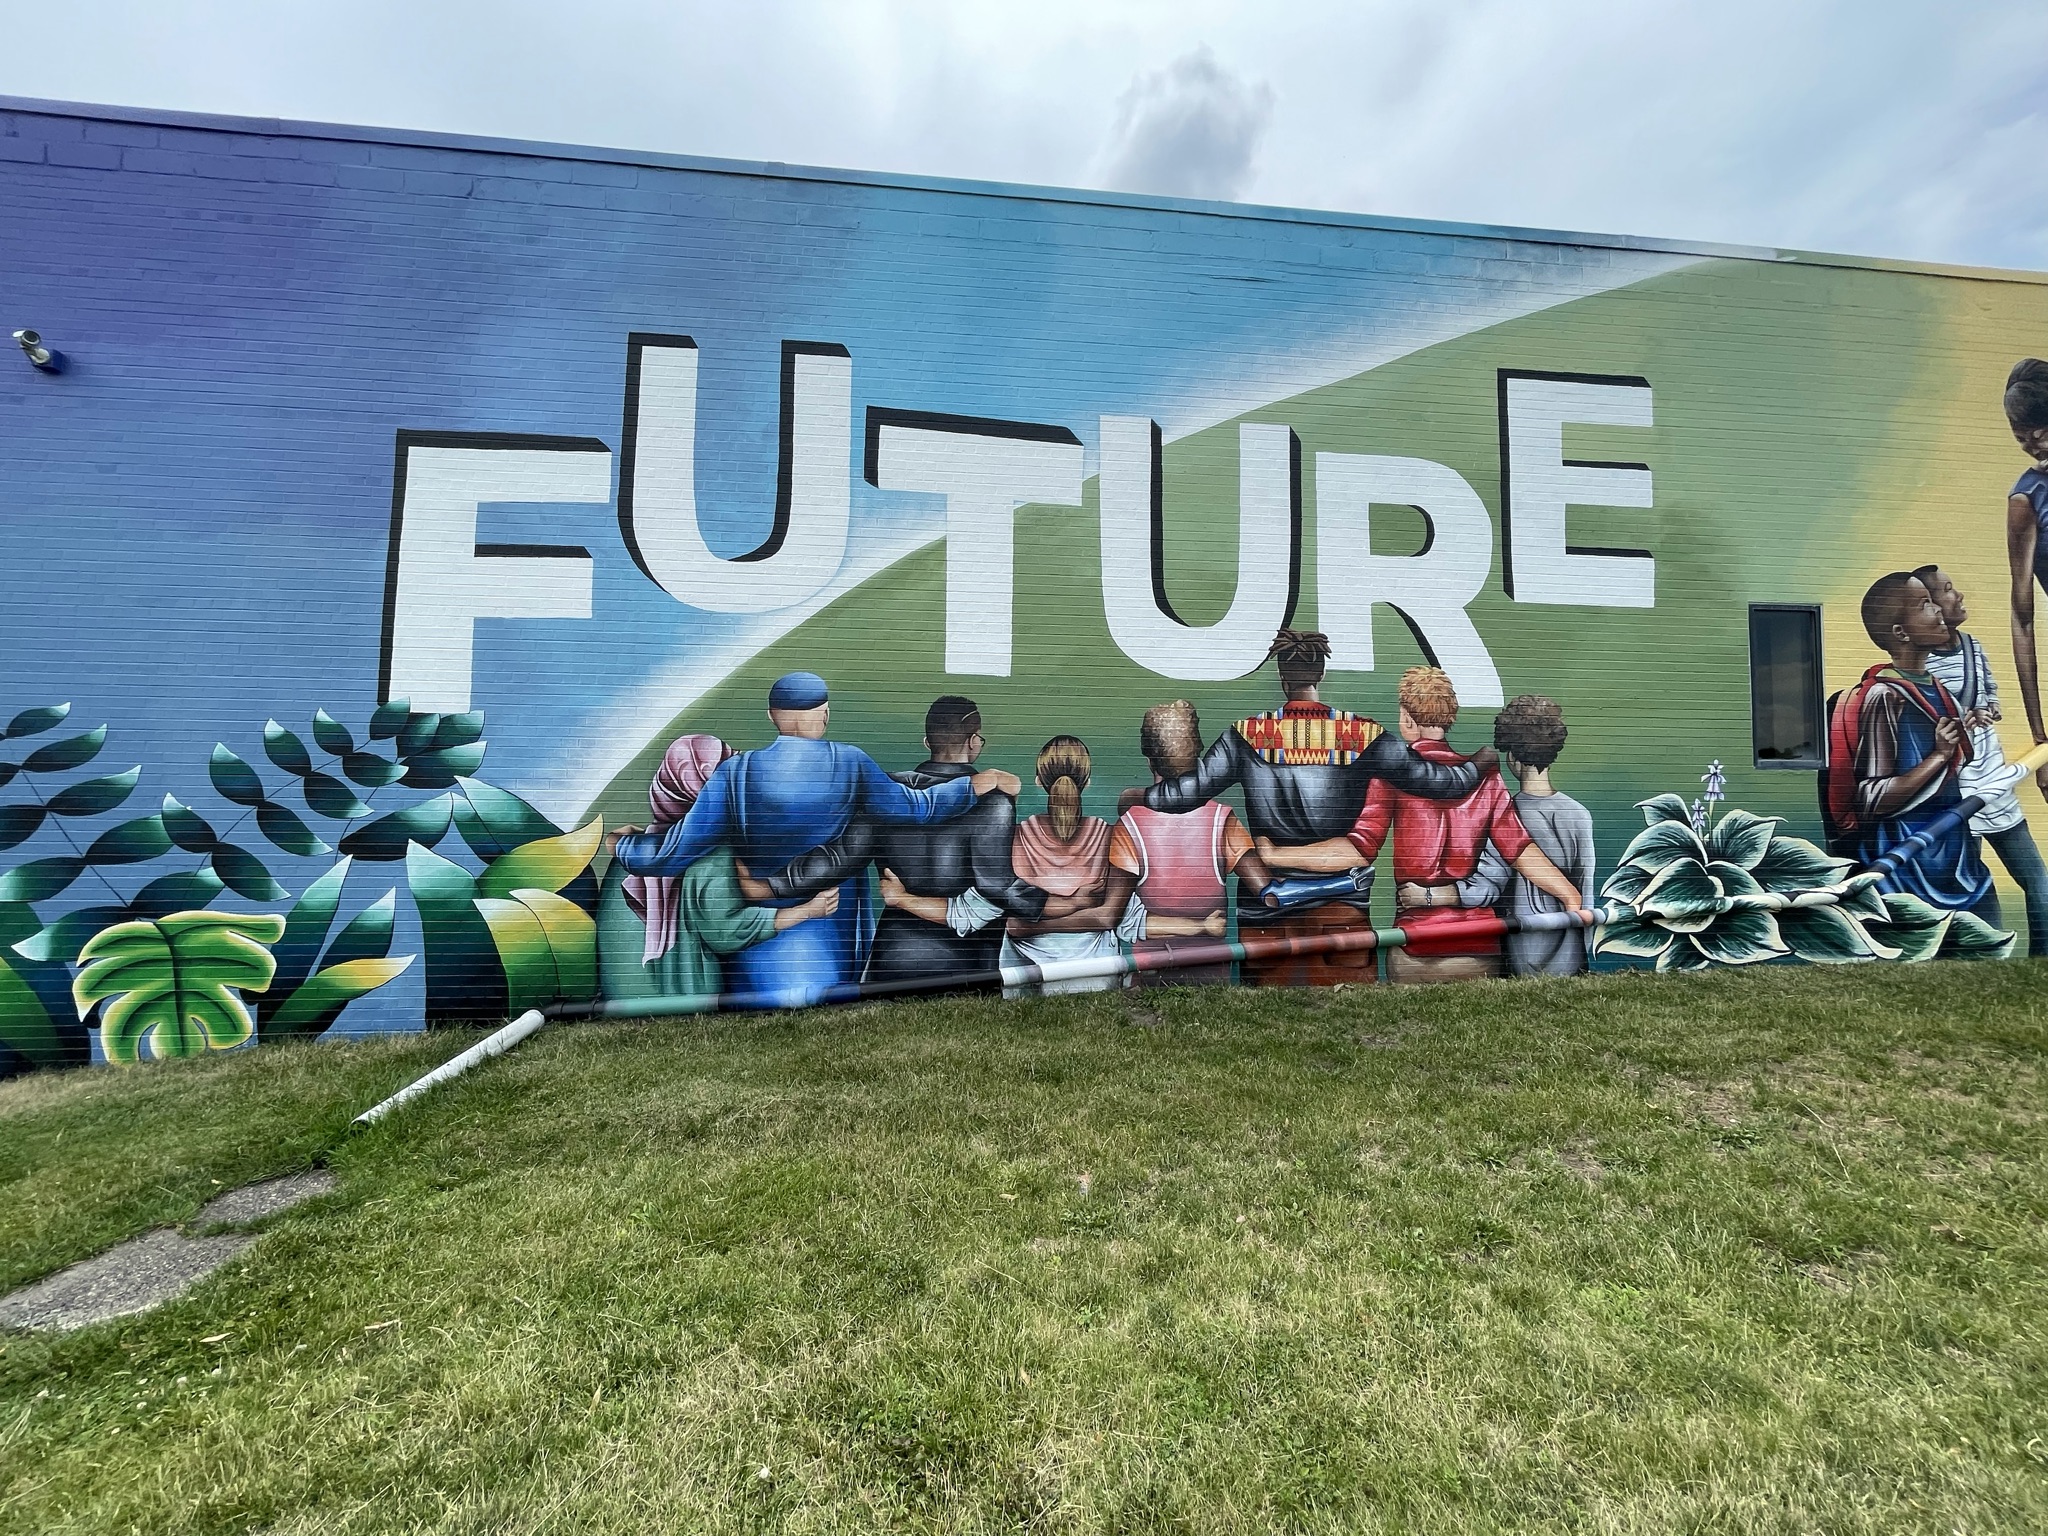 A mural depicting a group of people with dark skin tones and dark hair embracing with their backs to the viewer. They are placed under letters that read "future" in all caps across a blue and green horizon-like background.